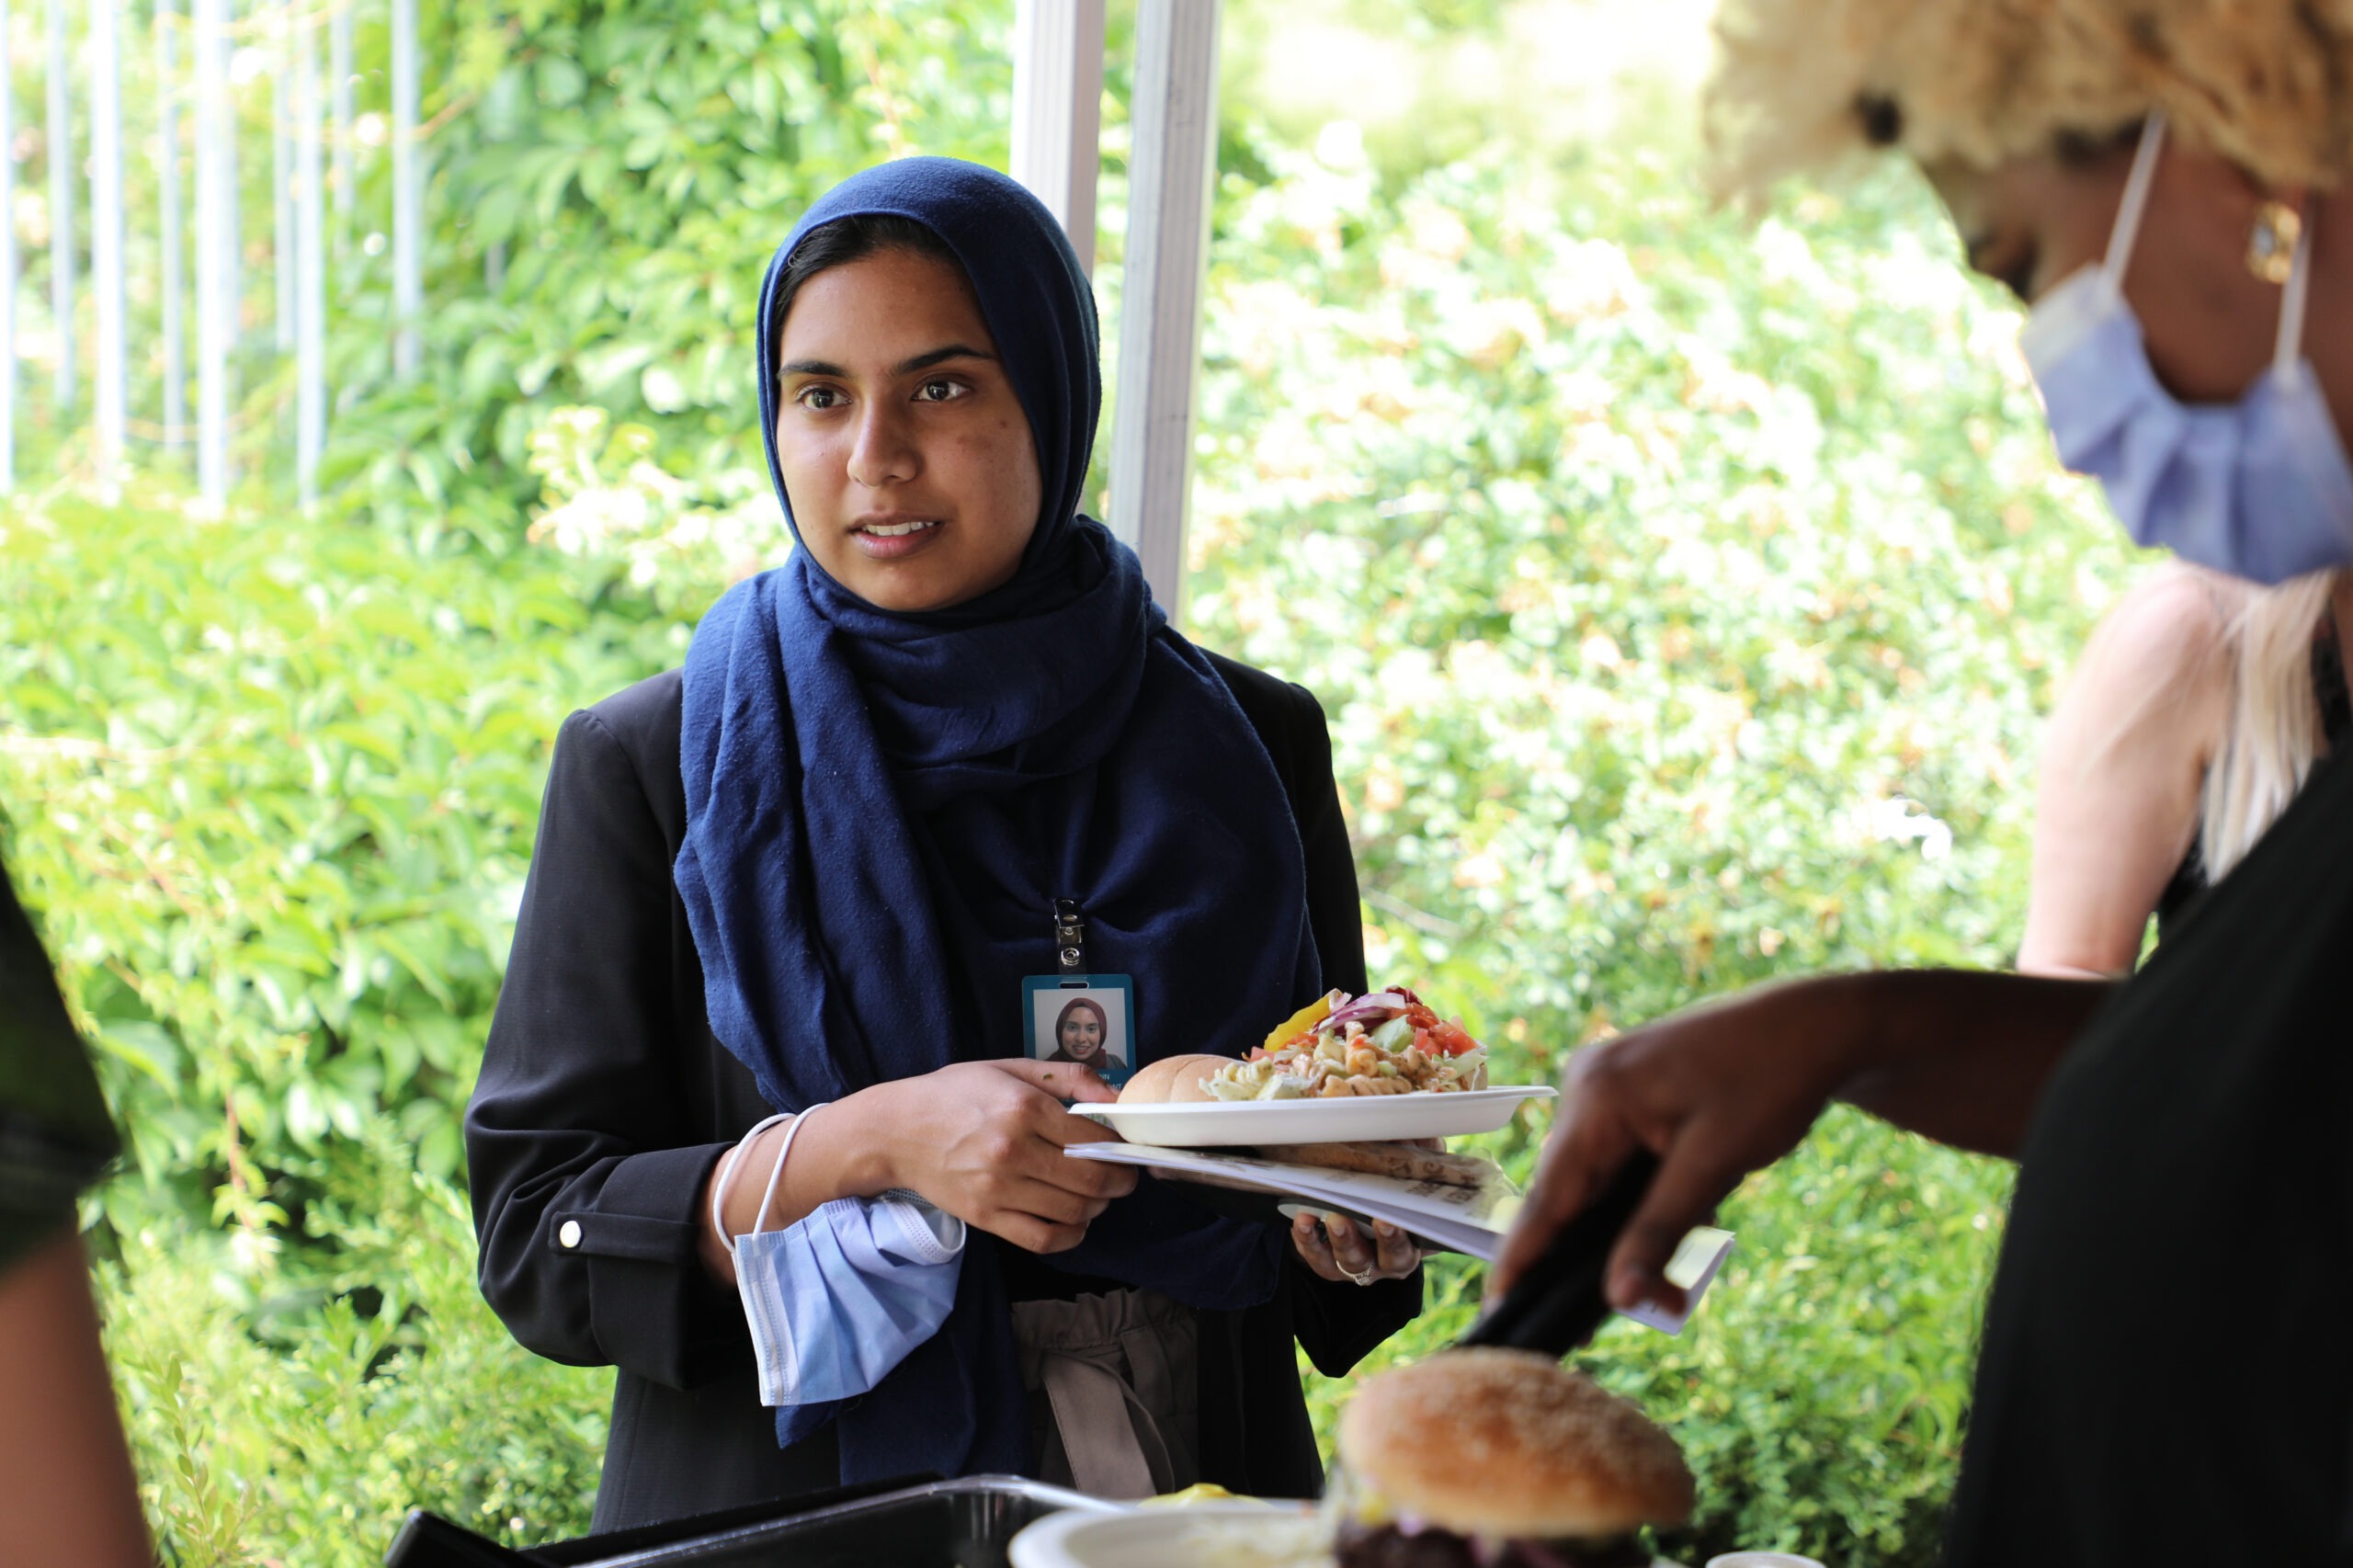 Women's College Hospital Staff BBQ - woman wearing hijab speaks with colleagues